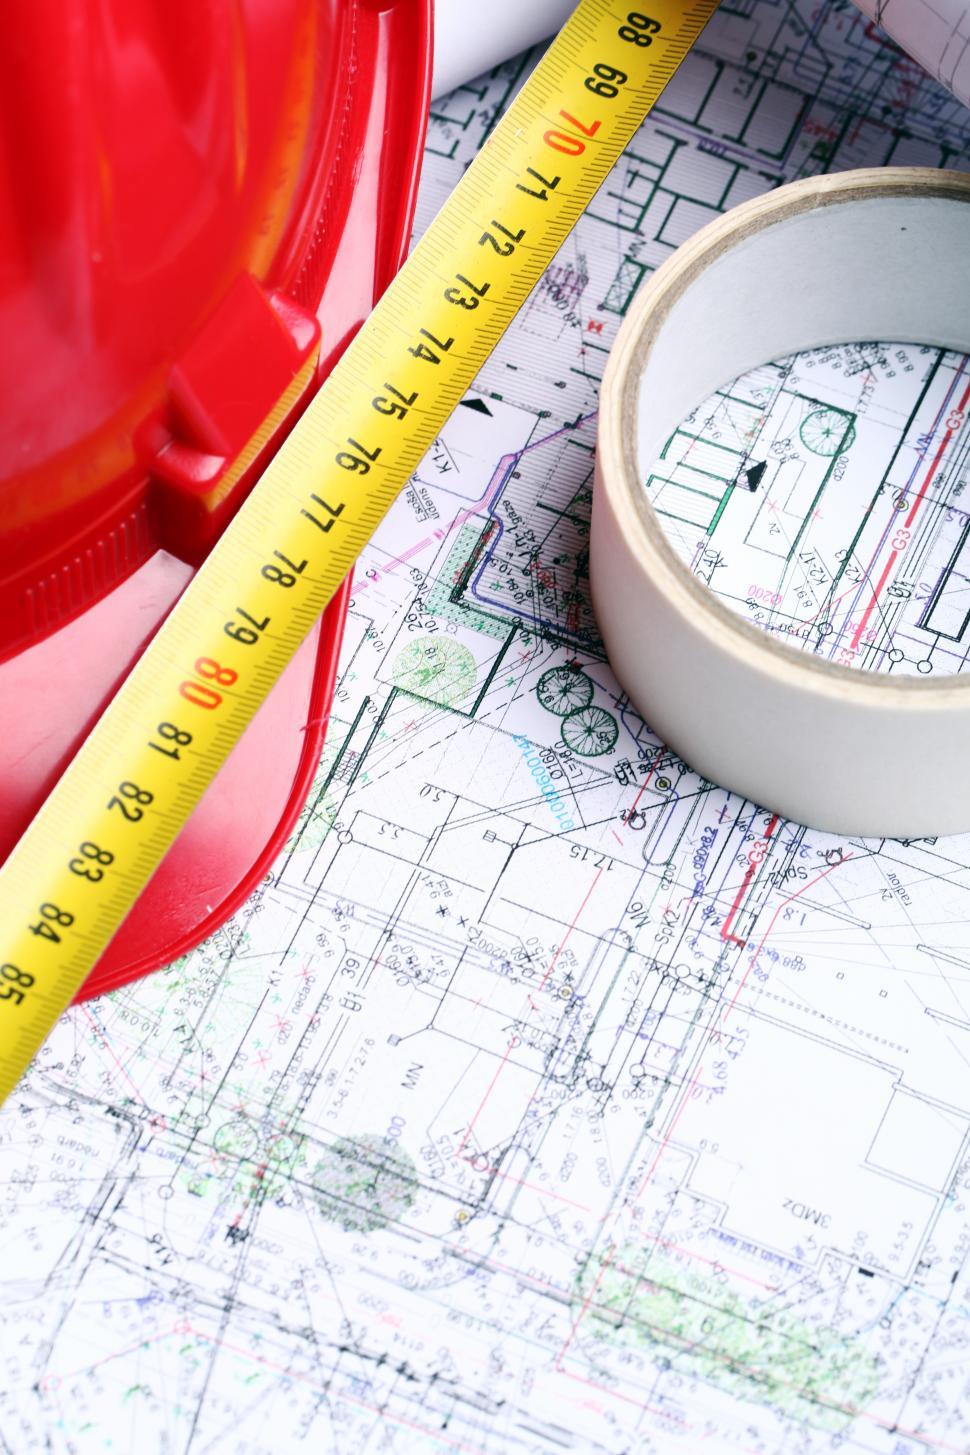 Free Image of Construction blueprints, tape and hard hat 